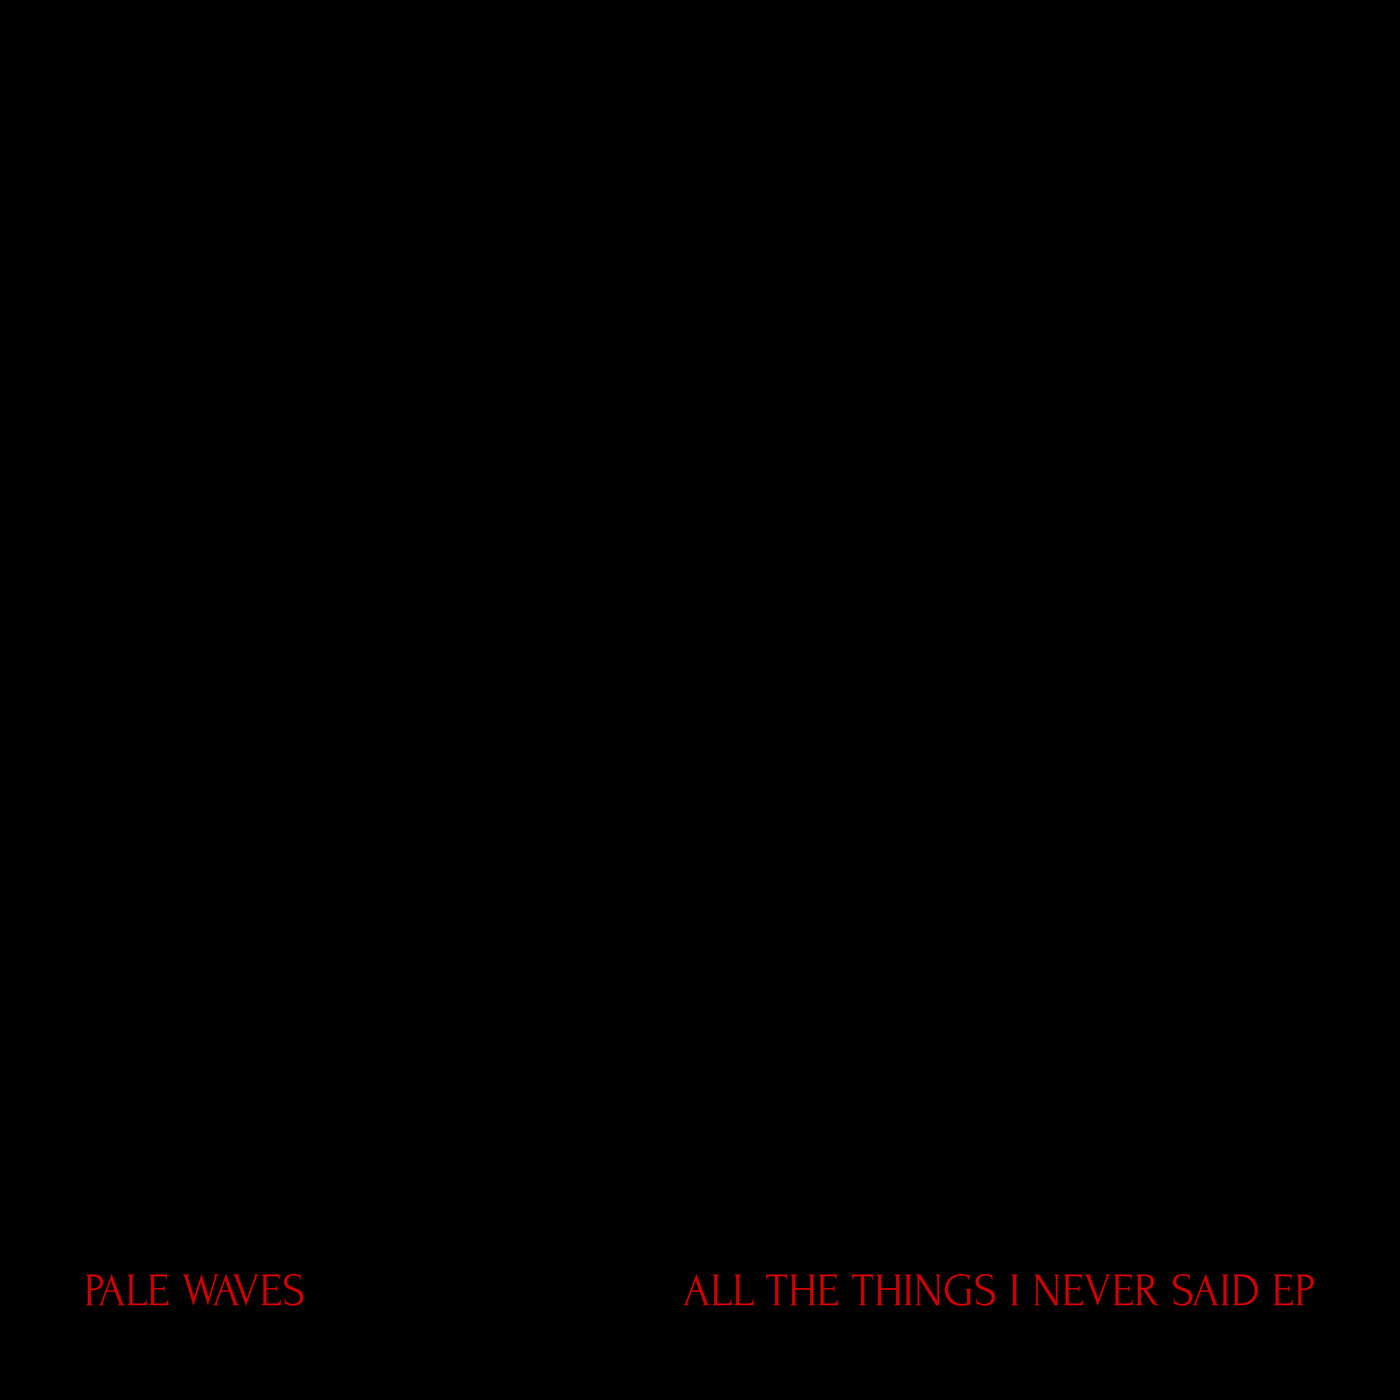 Heavenly (song), Pale Waves Wiki